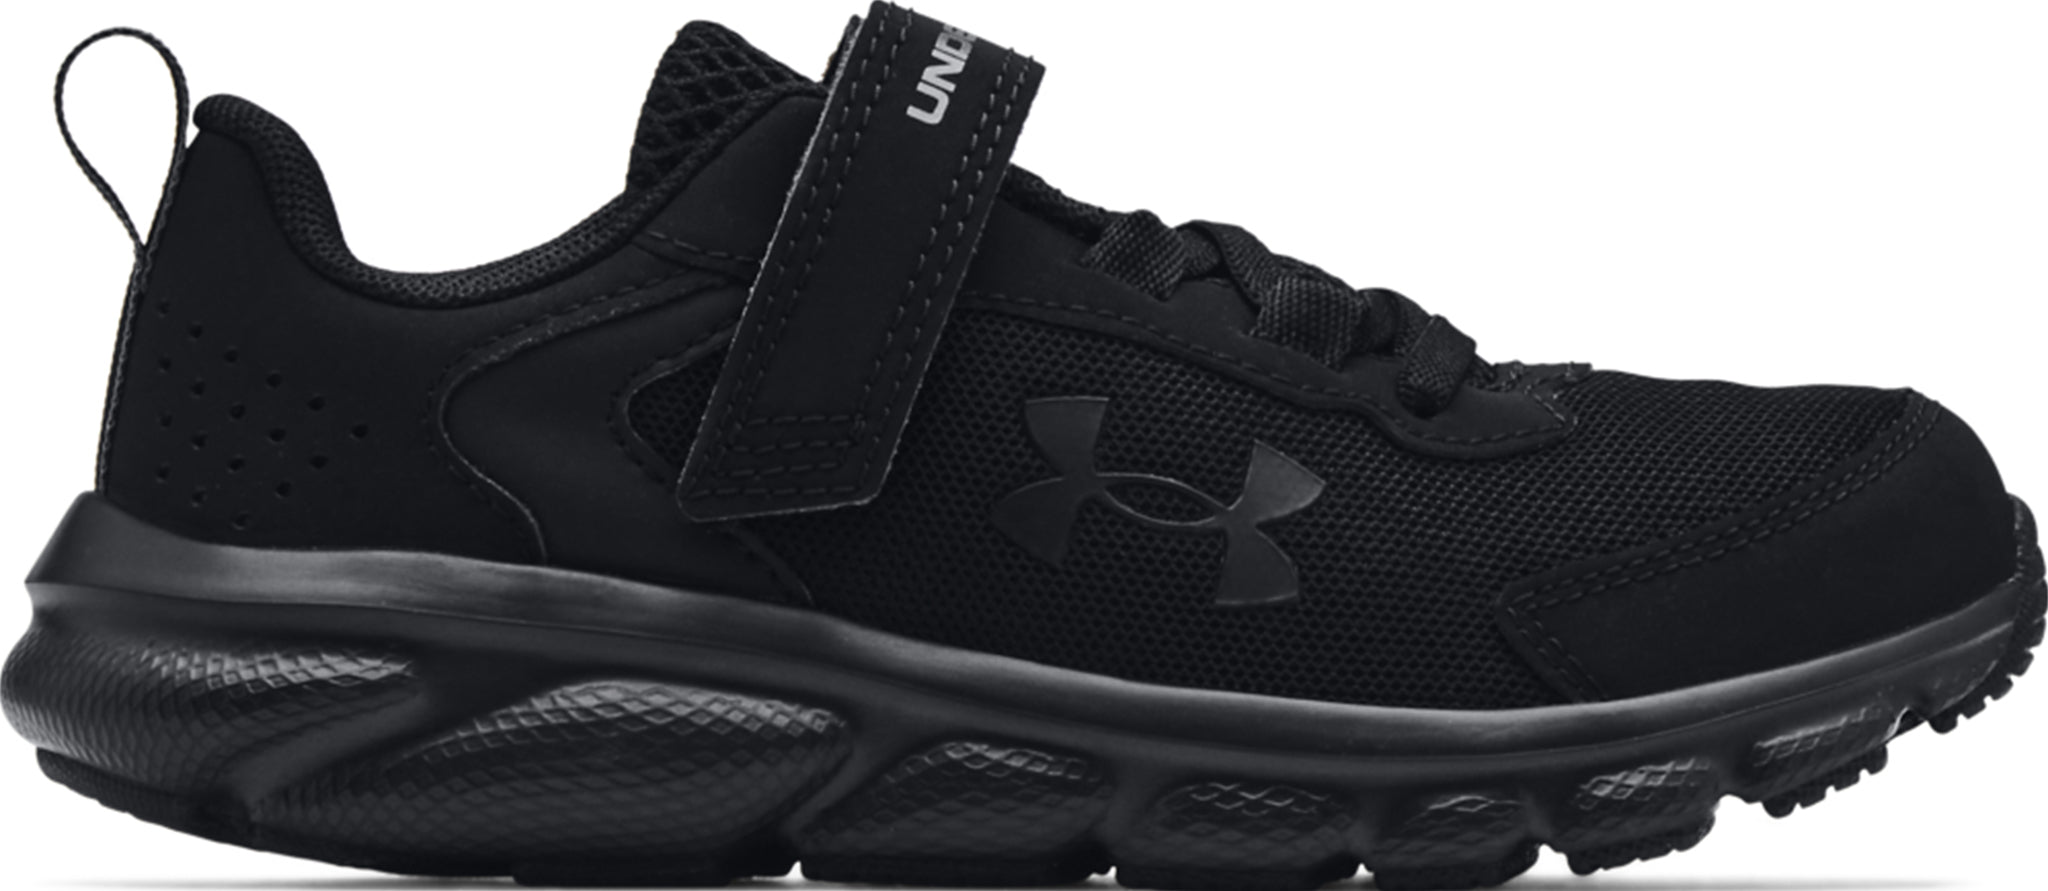 Under Armour Charged Assert 9 Running Shoe - Men's - Free Shipping